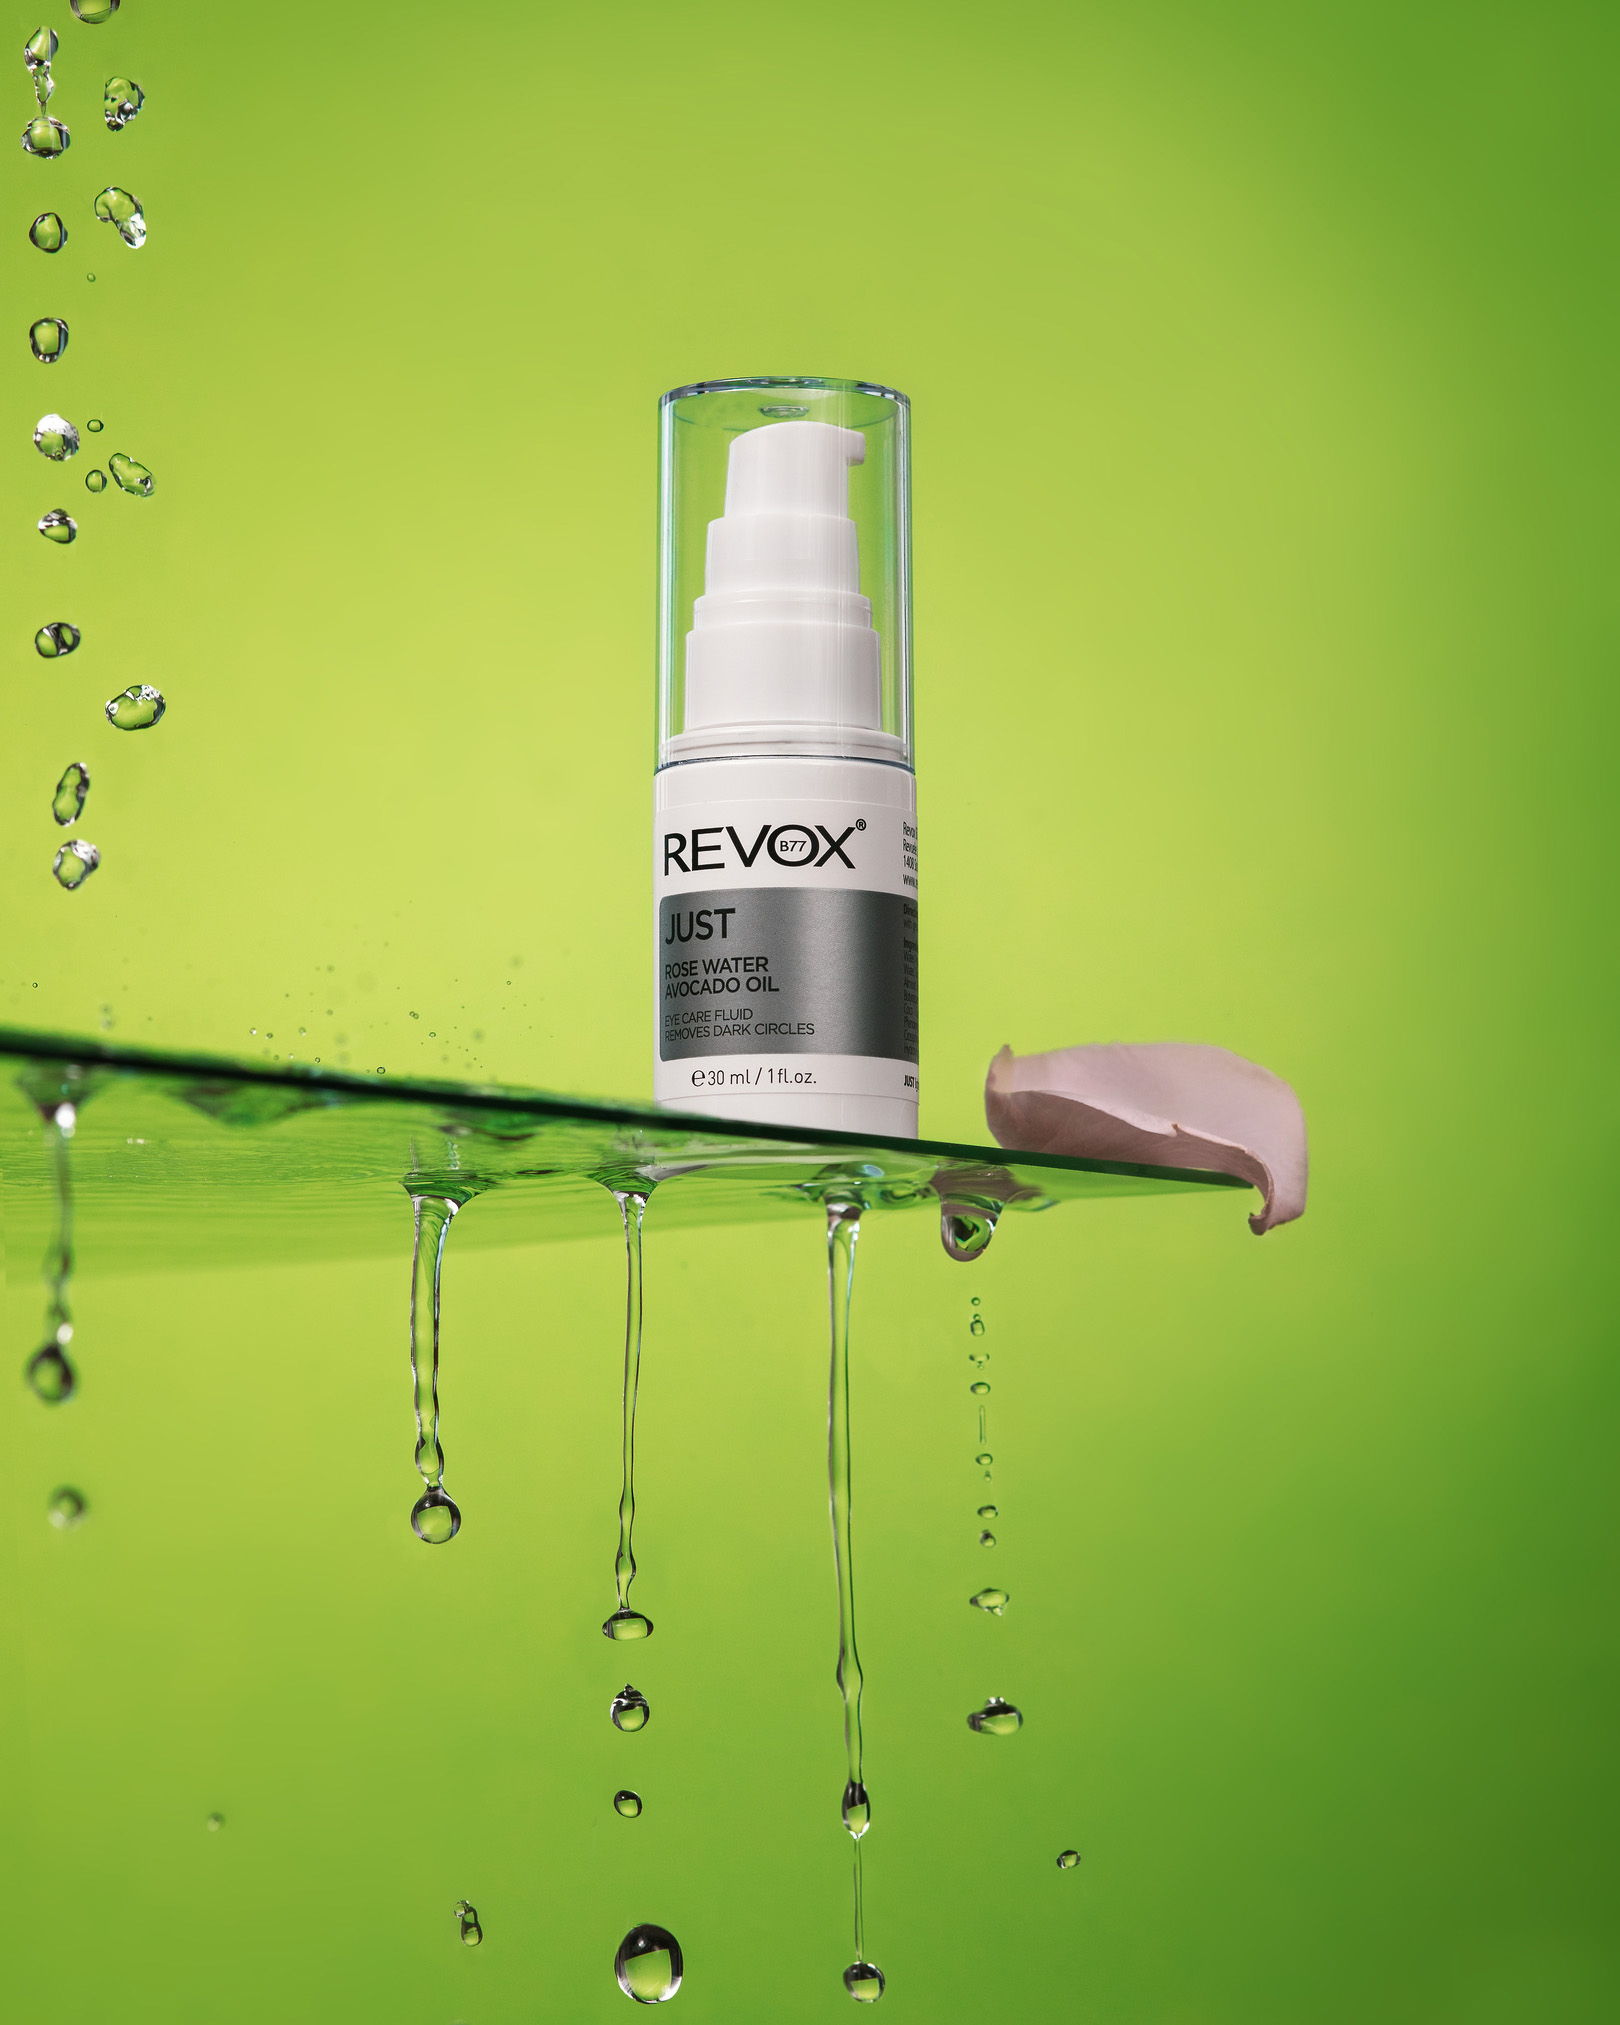 Revox - Just Rose Water Avocado Oil. A bottle is on the edge of a glass in water and bubbles.